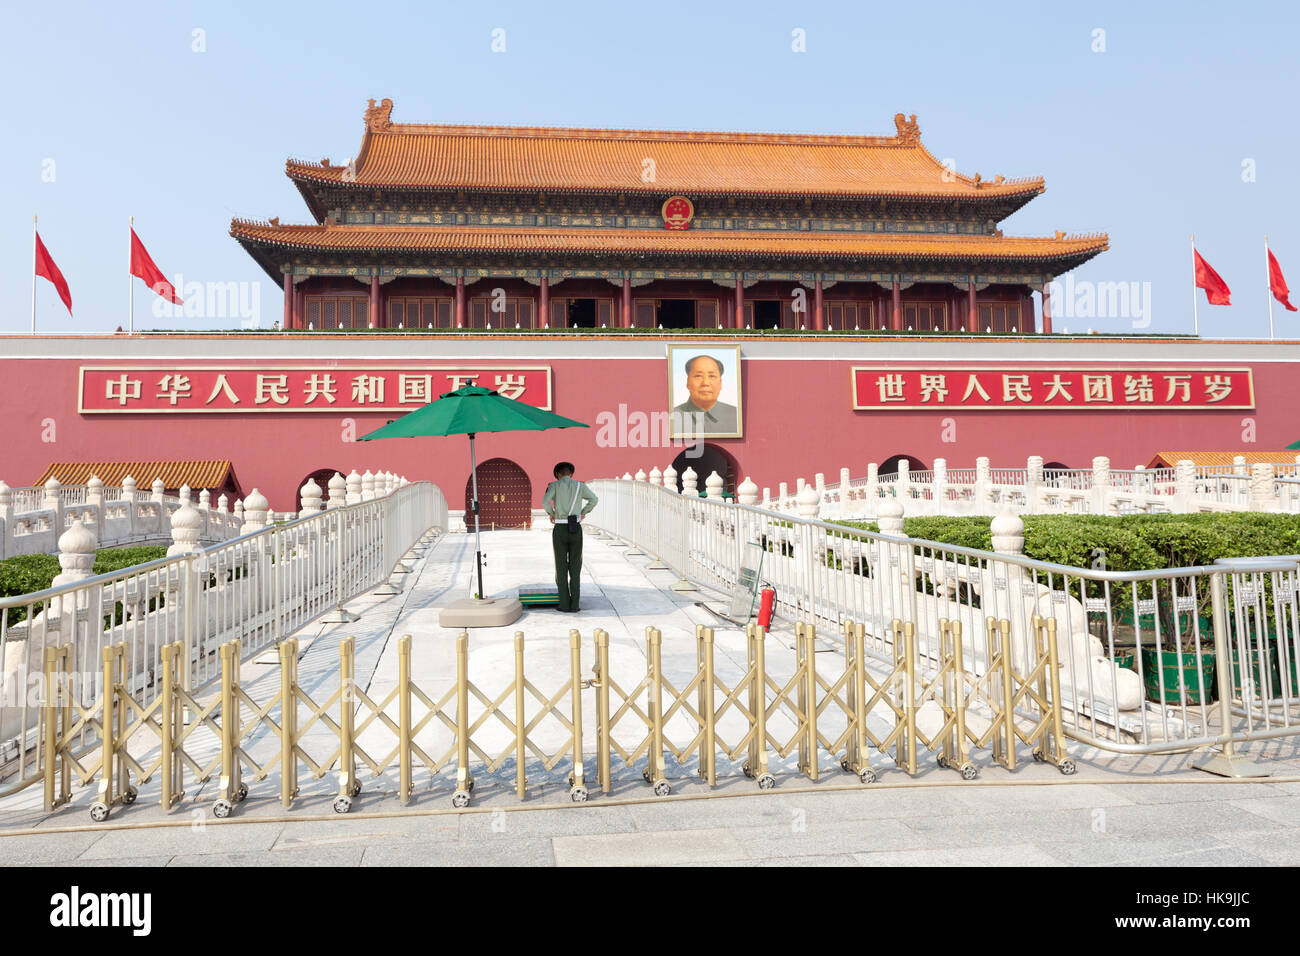 The entrance to the Forbidden City. Beijing, China Stock Photo